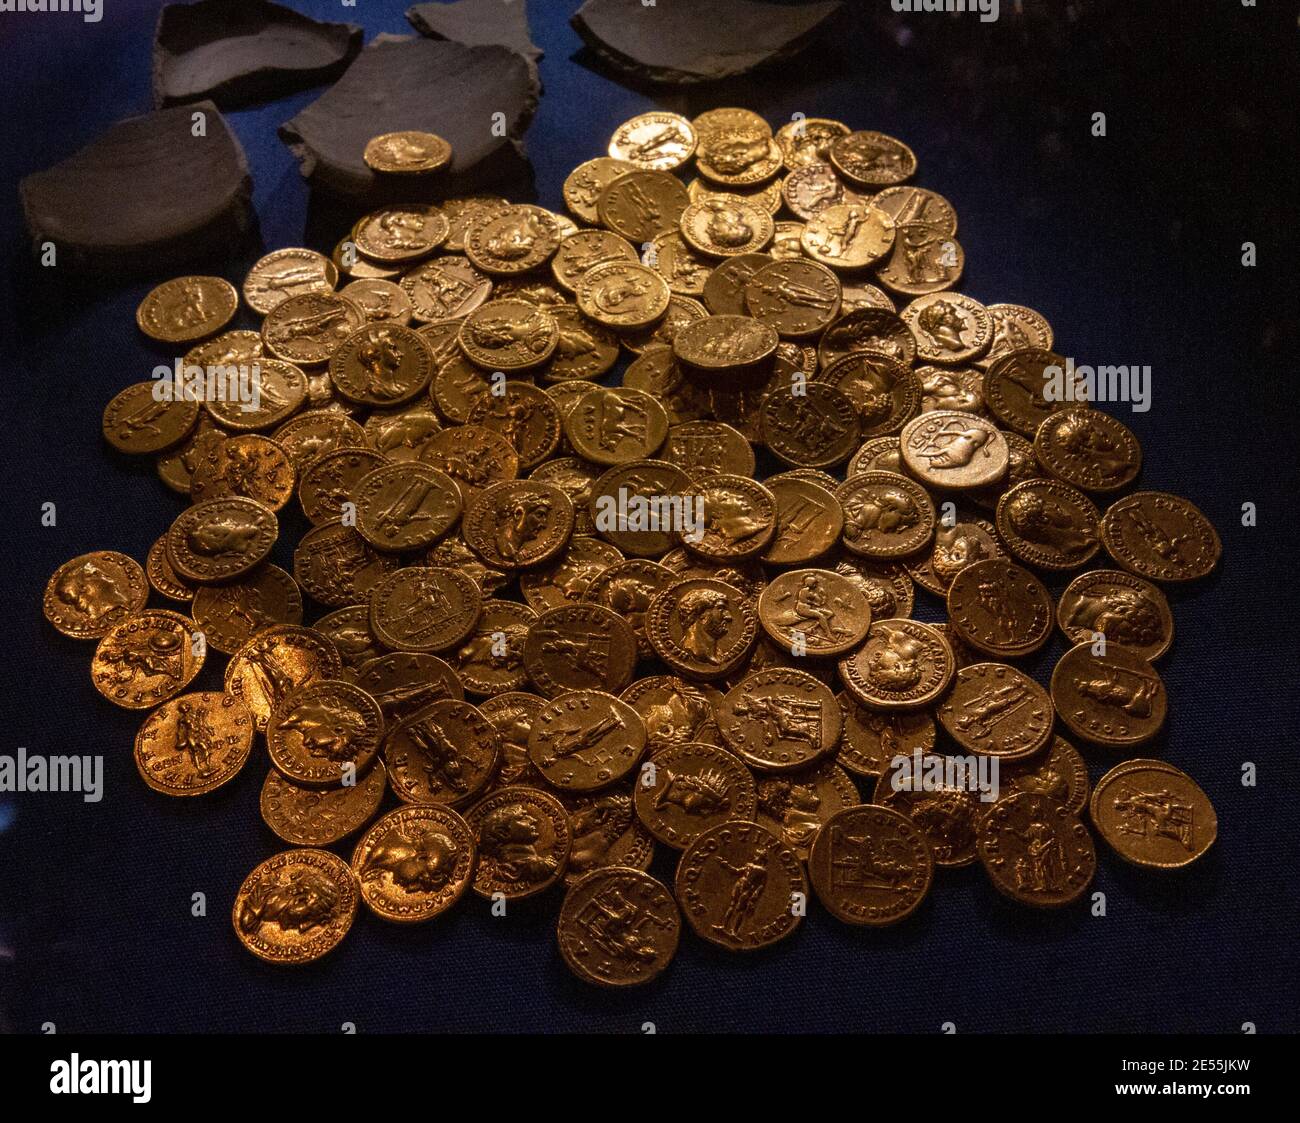 The Didcot Hoard of rare Roman gold coins Ashmolean Museum, the University of Oxford's museum of art and archaeology, Oxford UK. Stock Photo